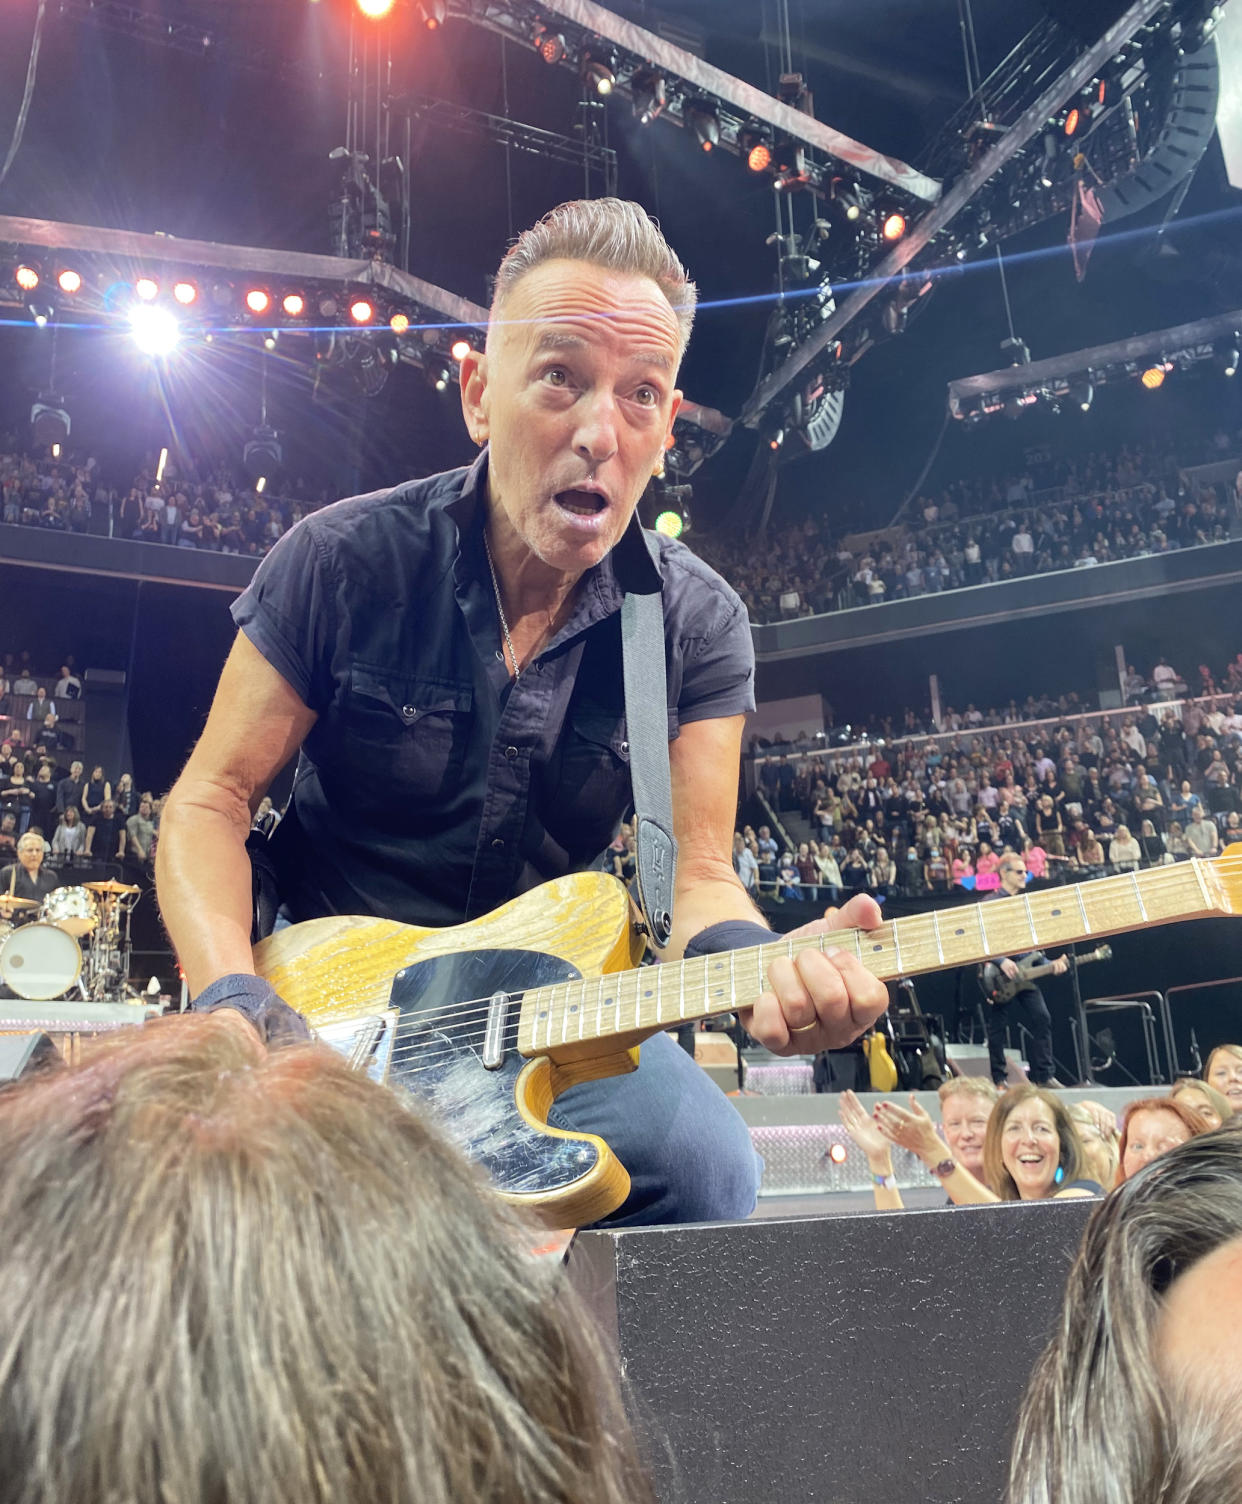 Wax figure or real rock star? I took this photo of Springsteen at a show in Brooklyn, New York. 
 (Courtesy Sharon Waters)